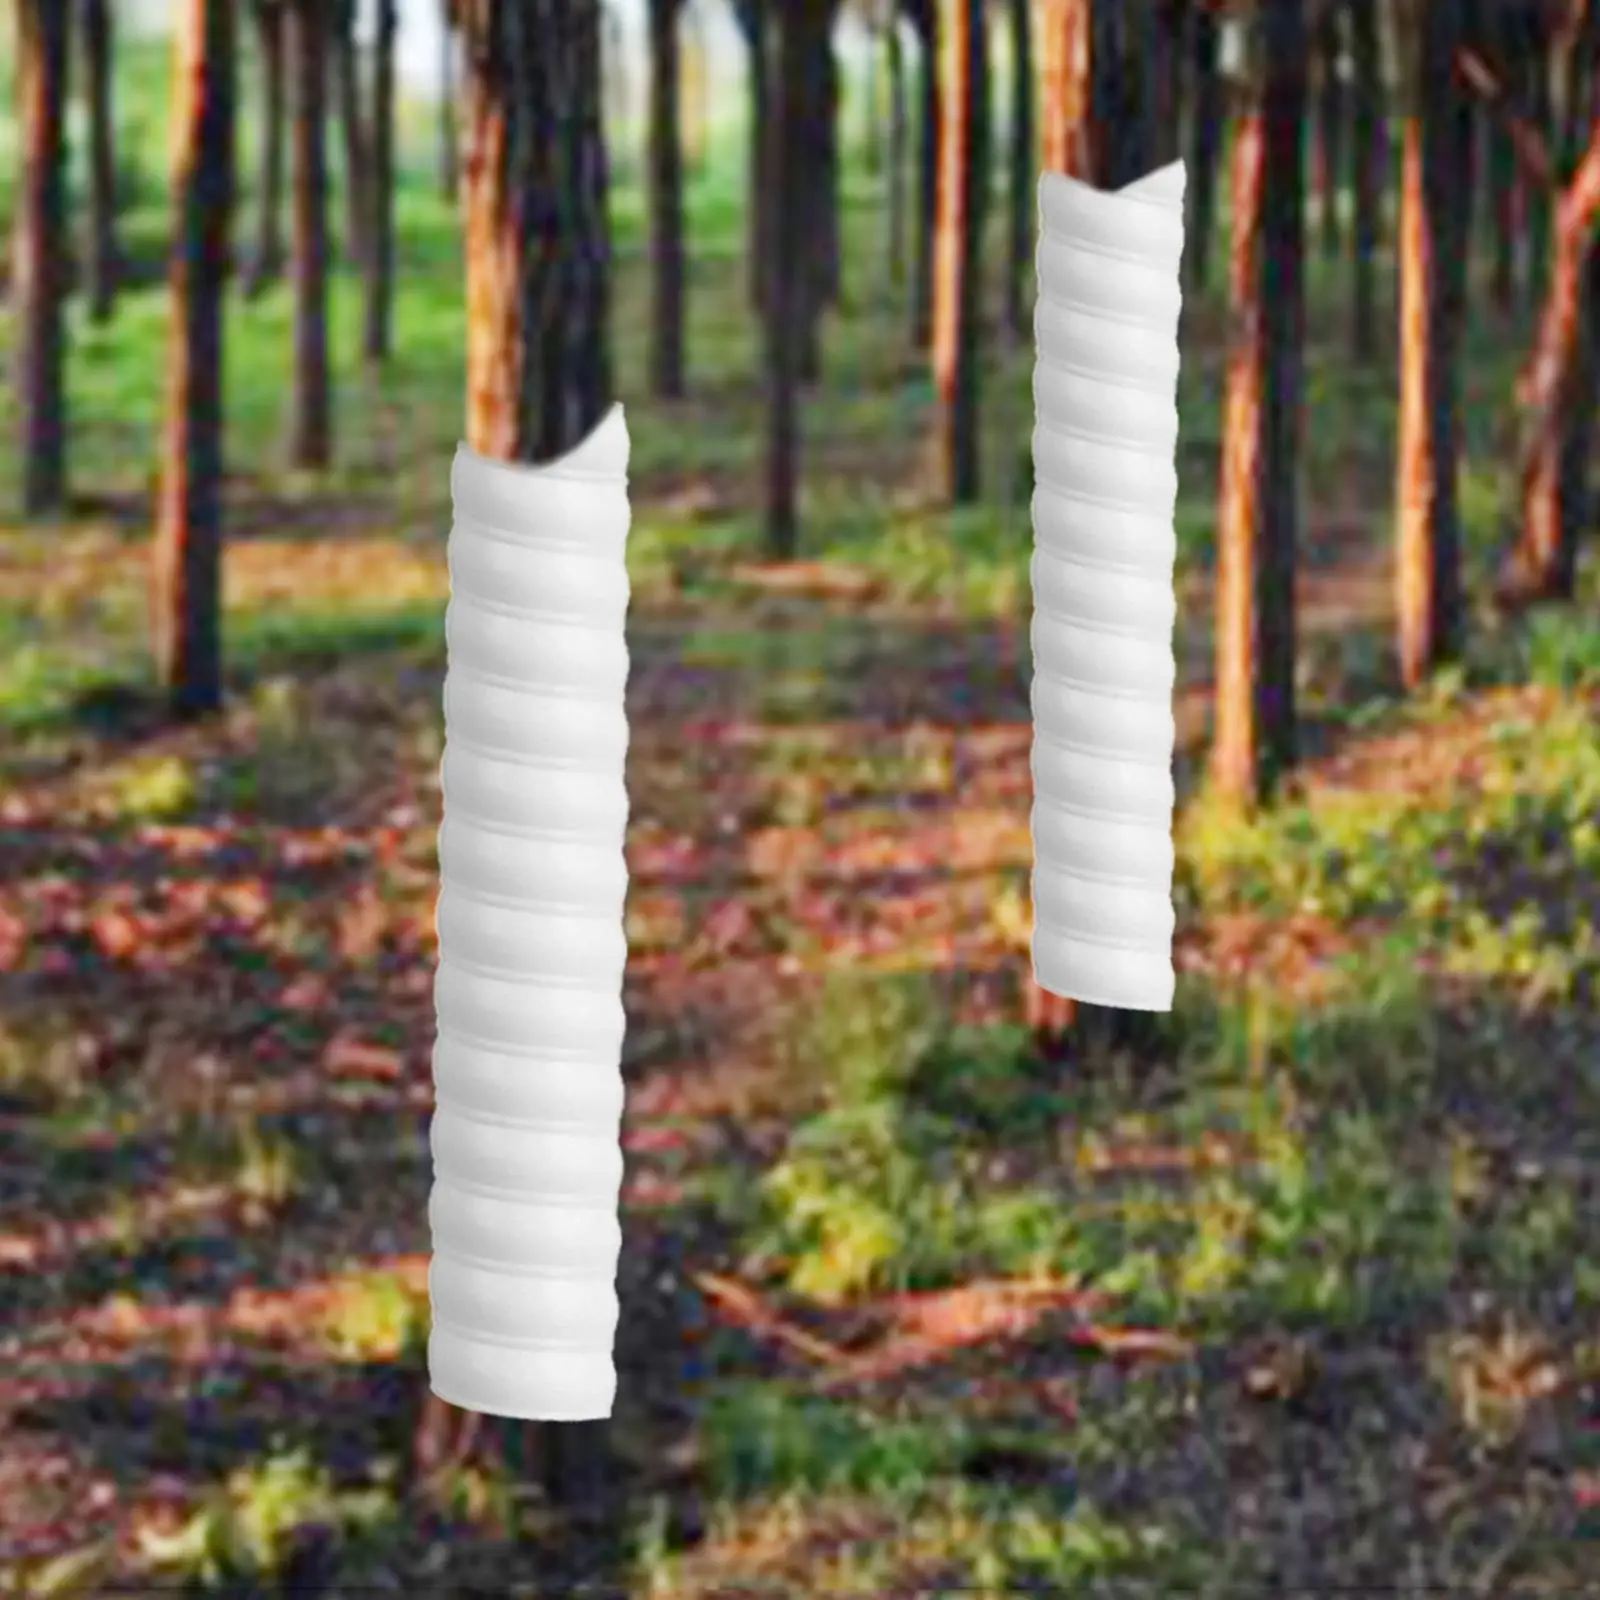 2Pcs Tree Trunk Protector Sleeve Weather Resistant Tree Cover Trees Protection Plants Guard Prevent Damage Trees Guard